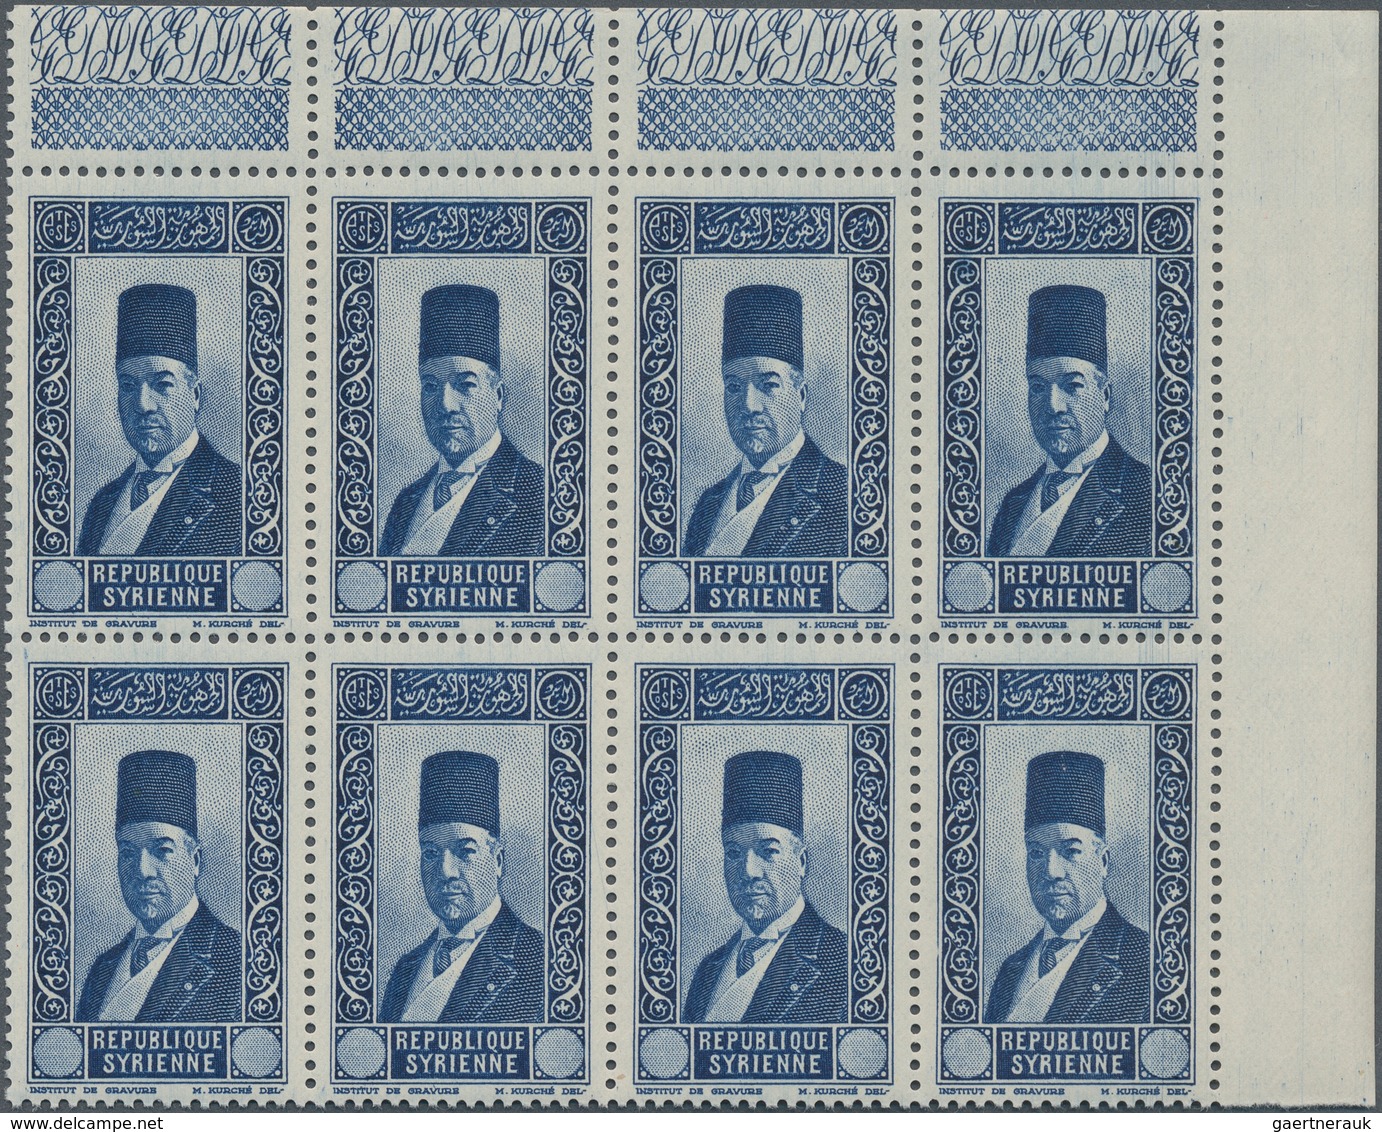 Syrien: 1934, 10 Years Republic (15pi.) Dark Blue (president Mohammed Ali Abed) WITHOUT DENOMINATION - Syrien